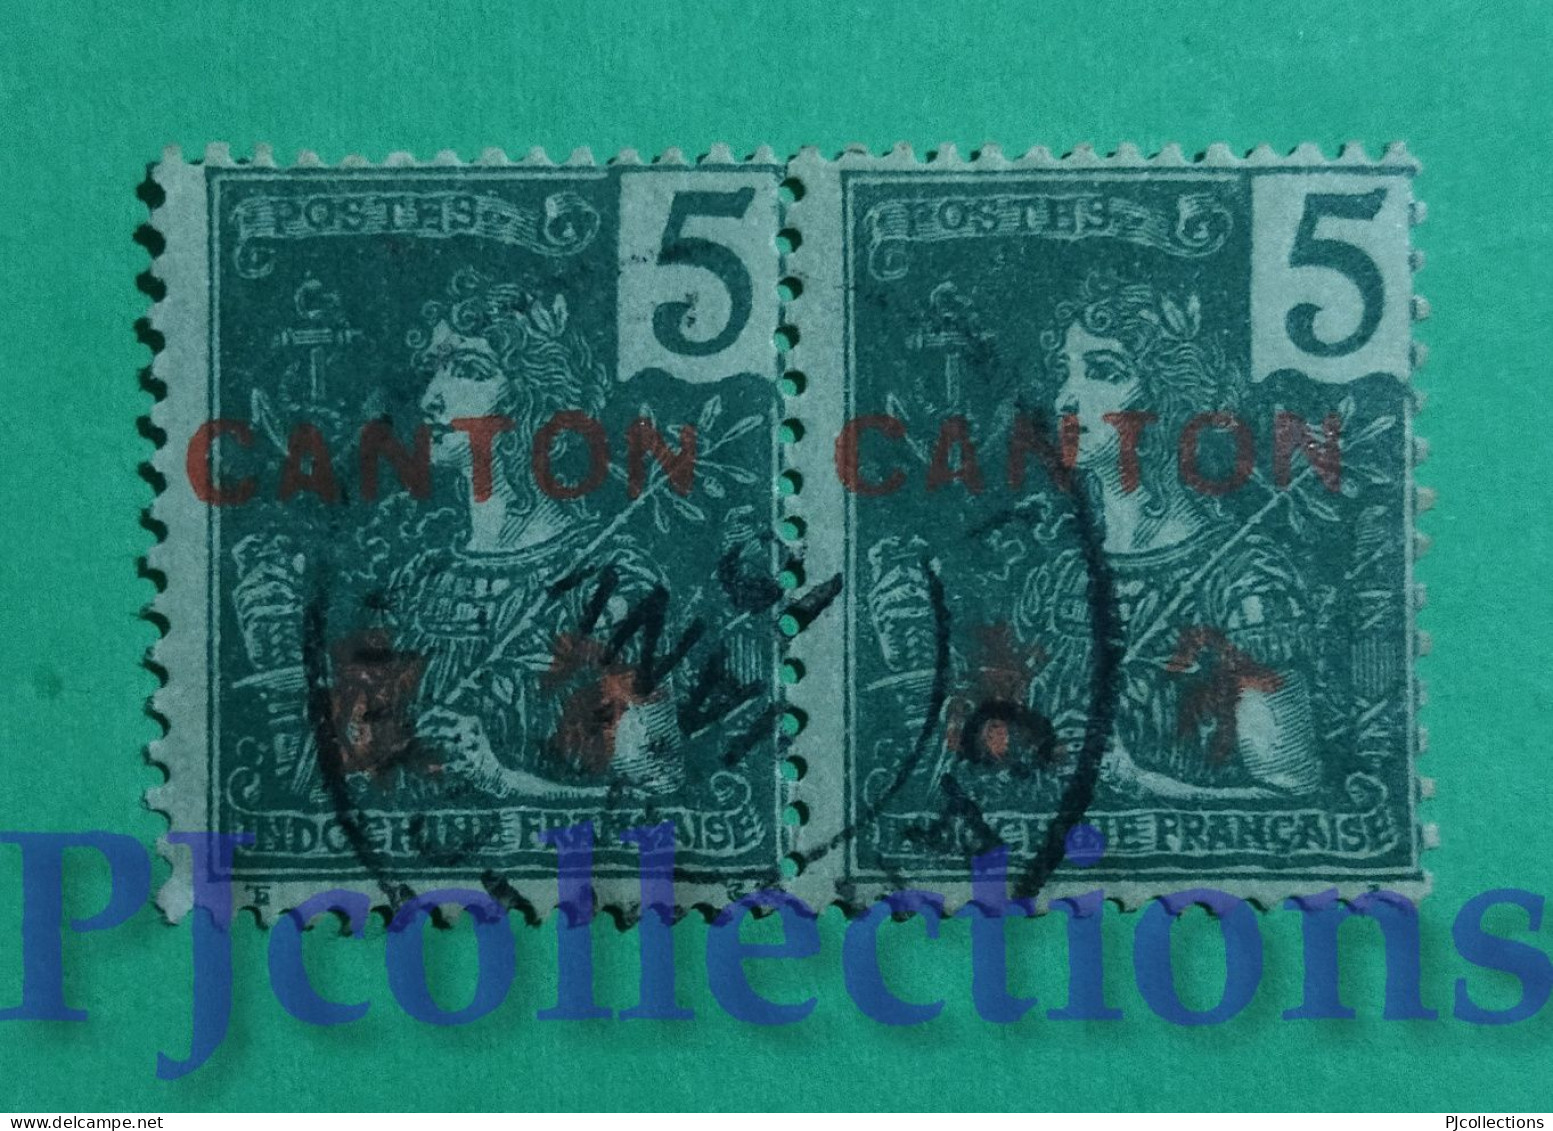 S786- FRENCH INDOCHINA CANTON 1907 OVERPRINTED 5c IN COPPIA - COUPLE USATI - USED - Oblitérés